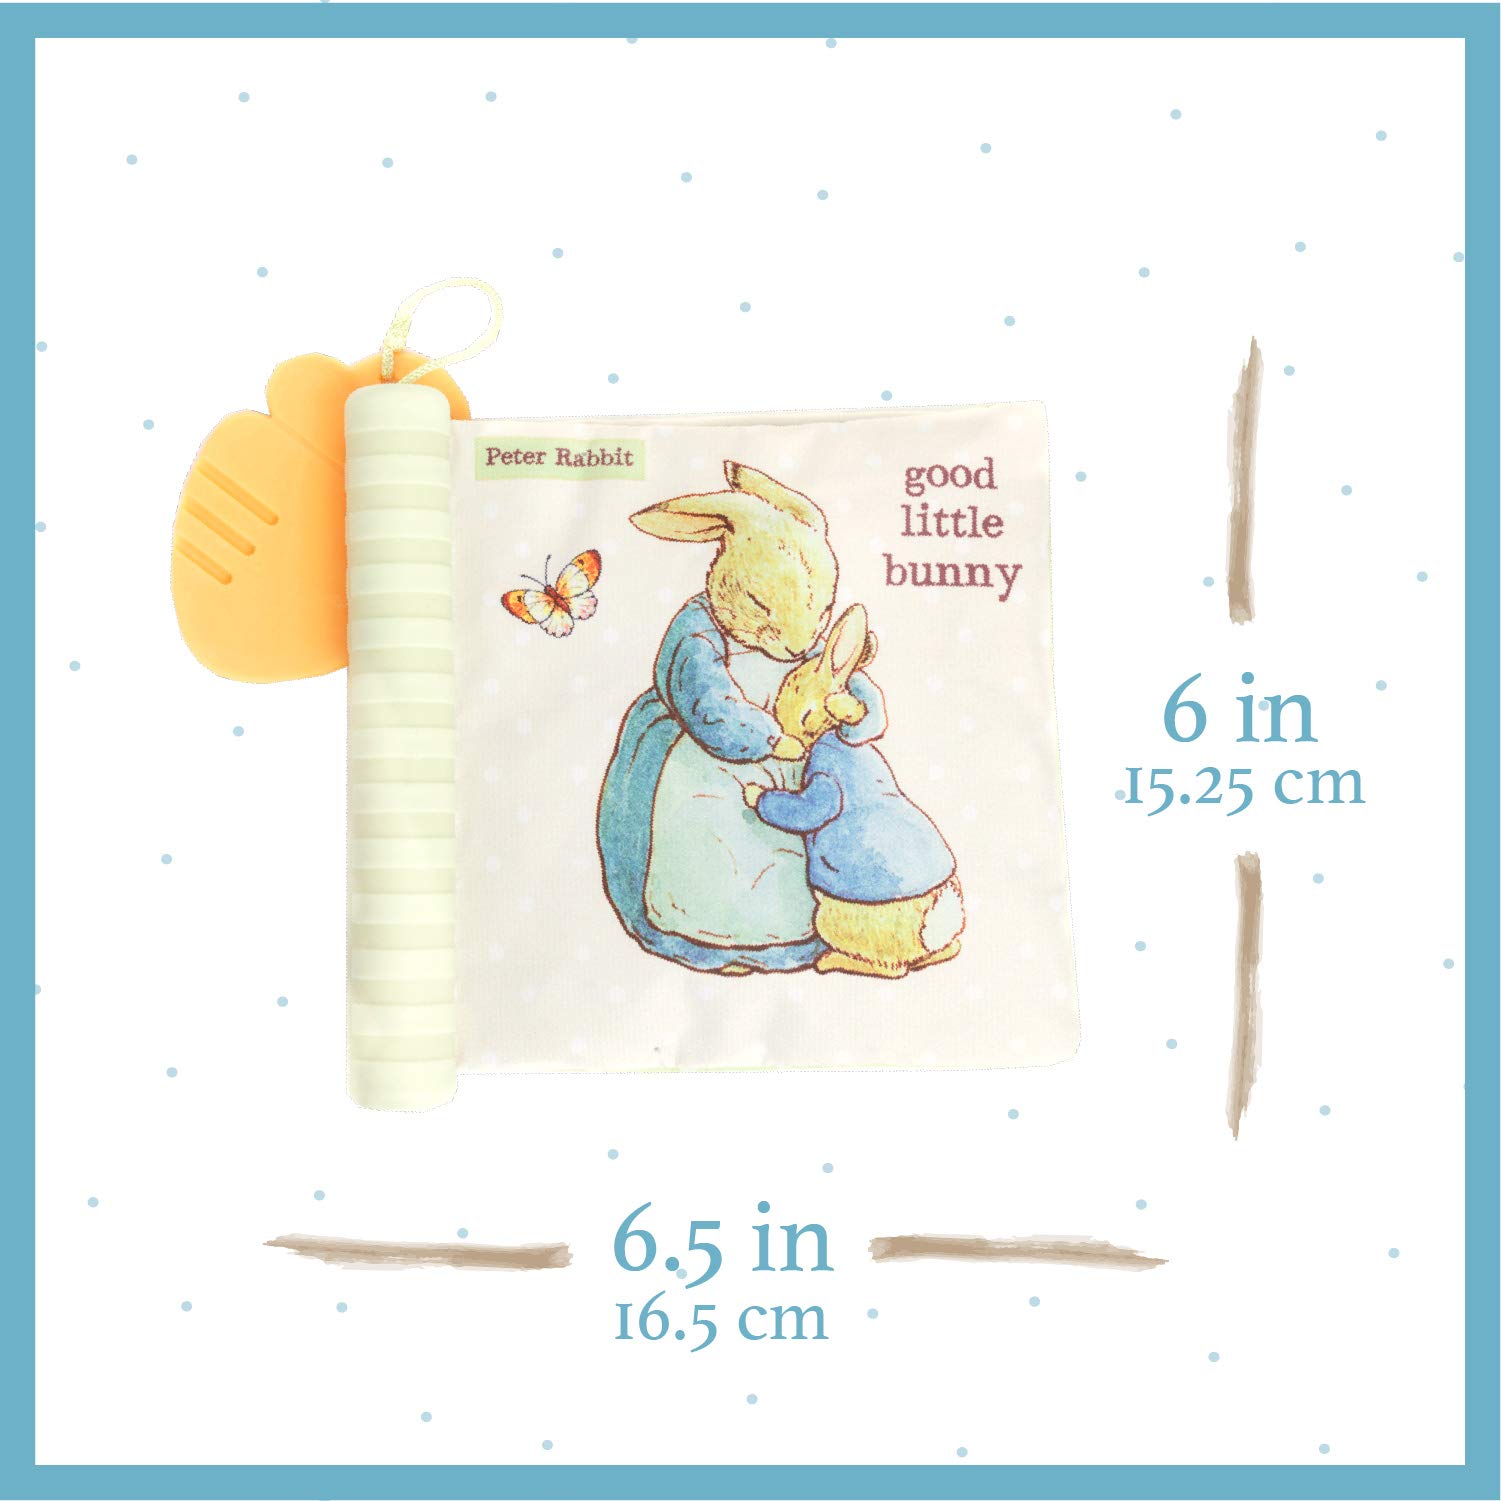 Beatrix Potter Peter Rabbit Soft Teether Book, 1 Count (Pack of 1)